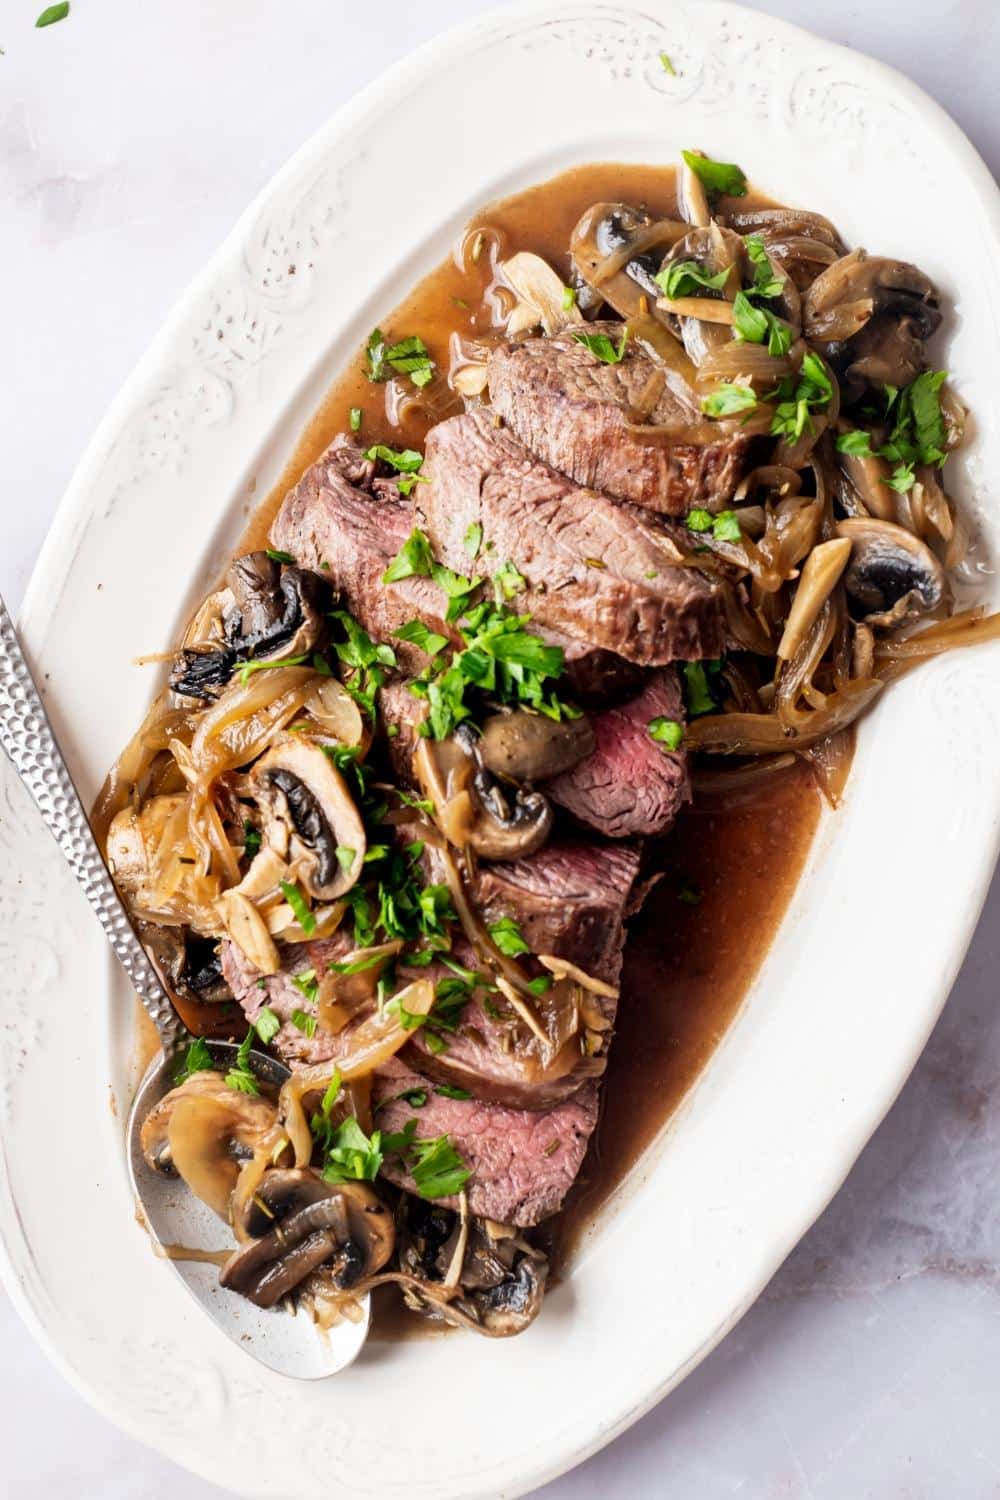 A bottom round roast sliced with mushrooms and onions on top on a white serving plate.